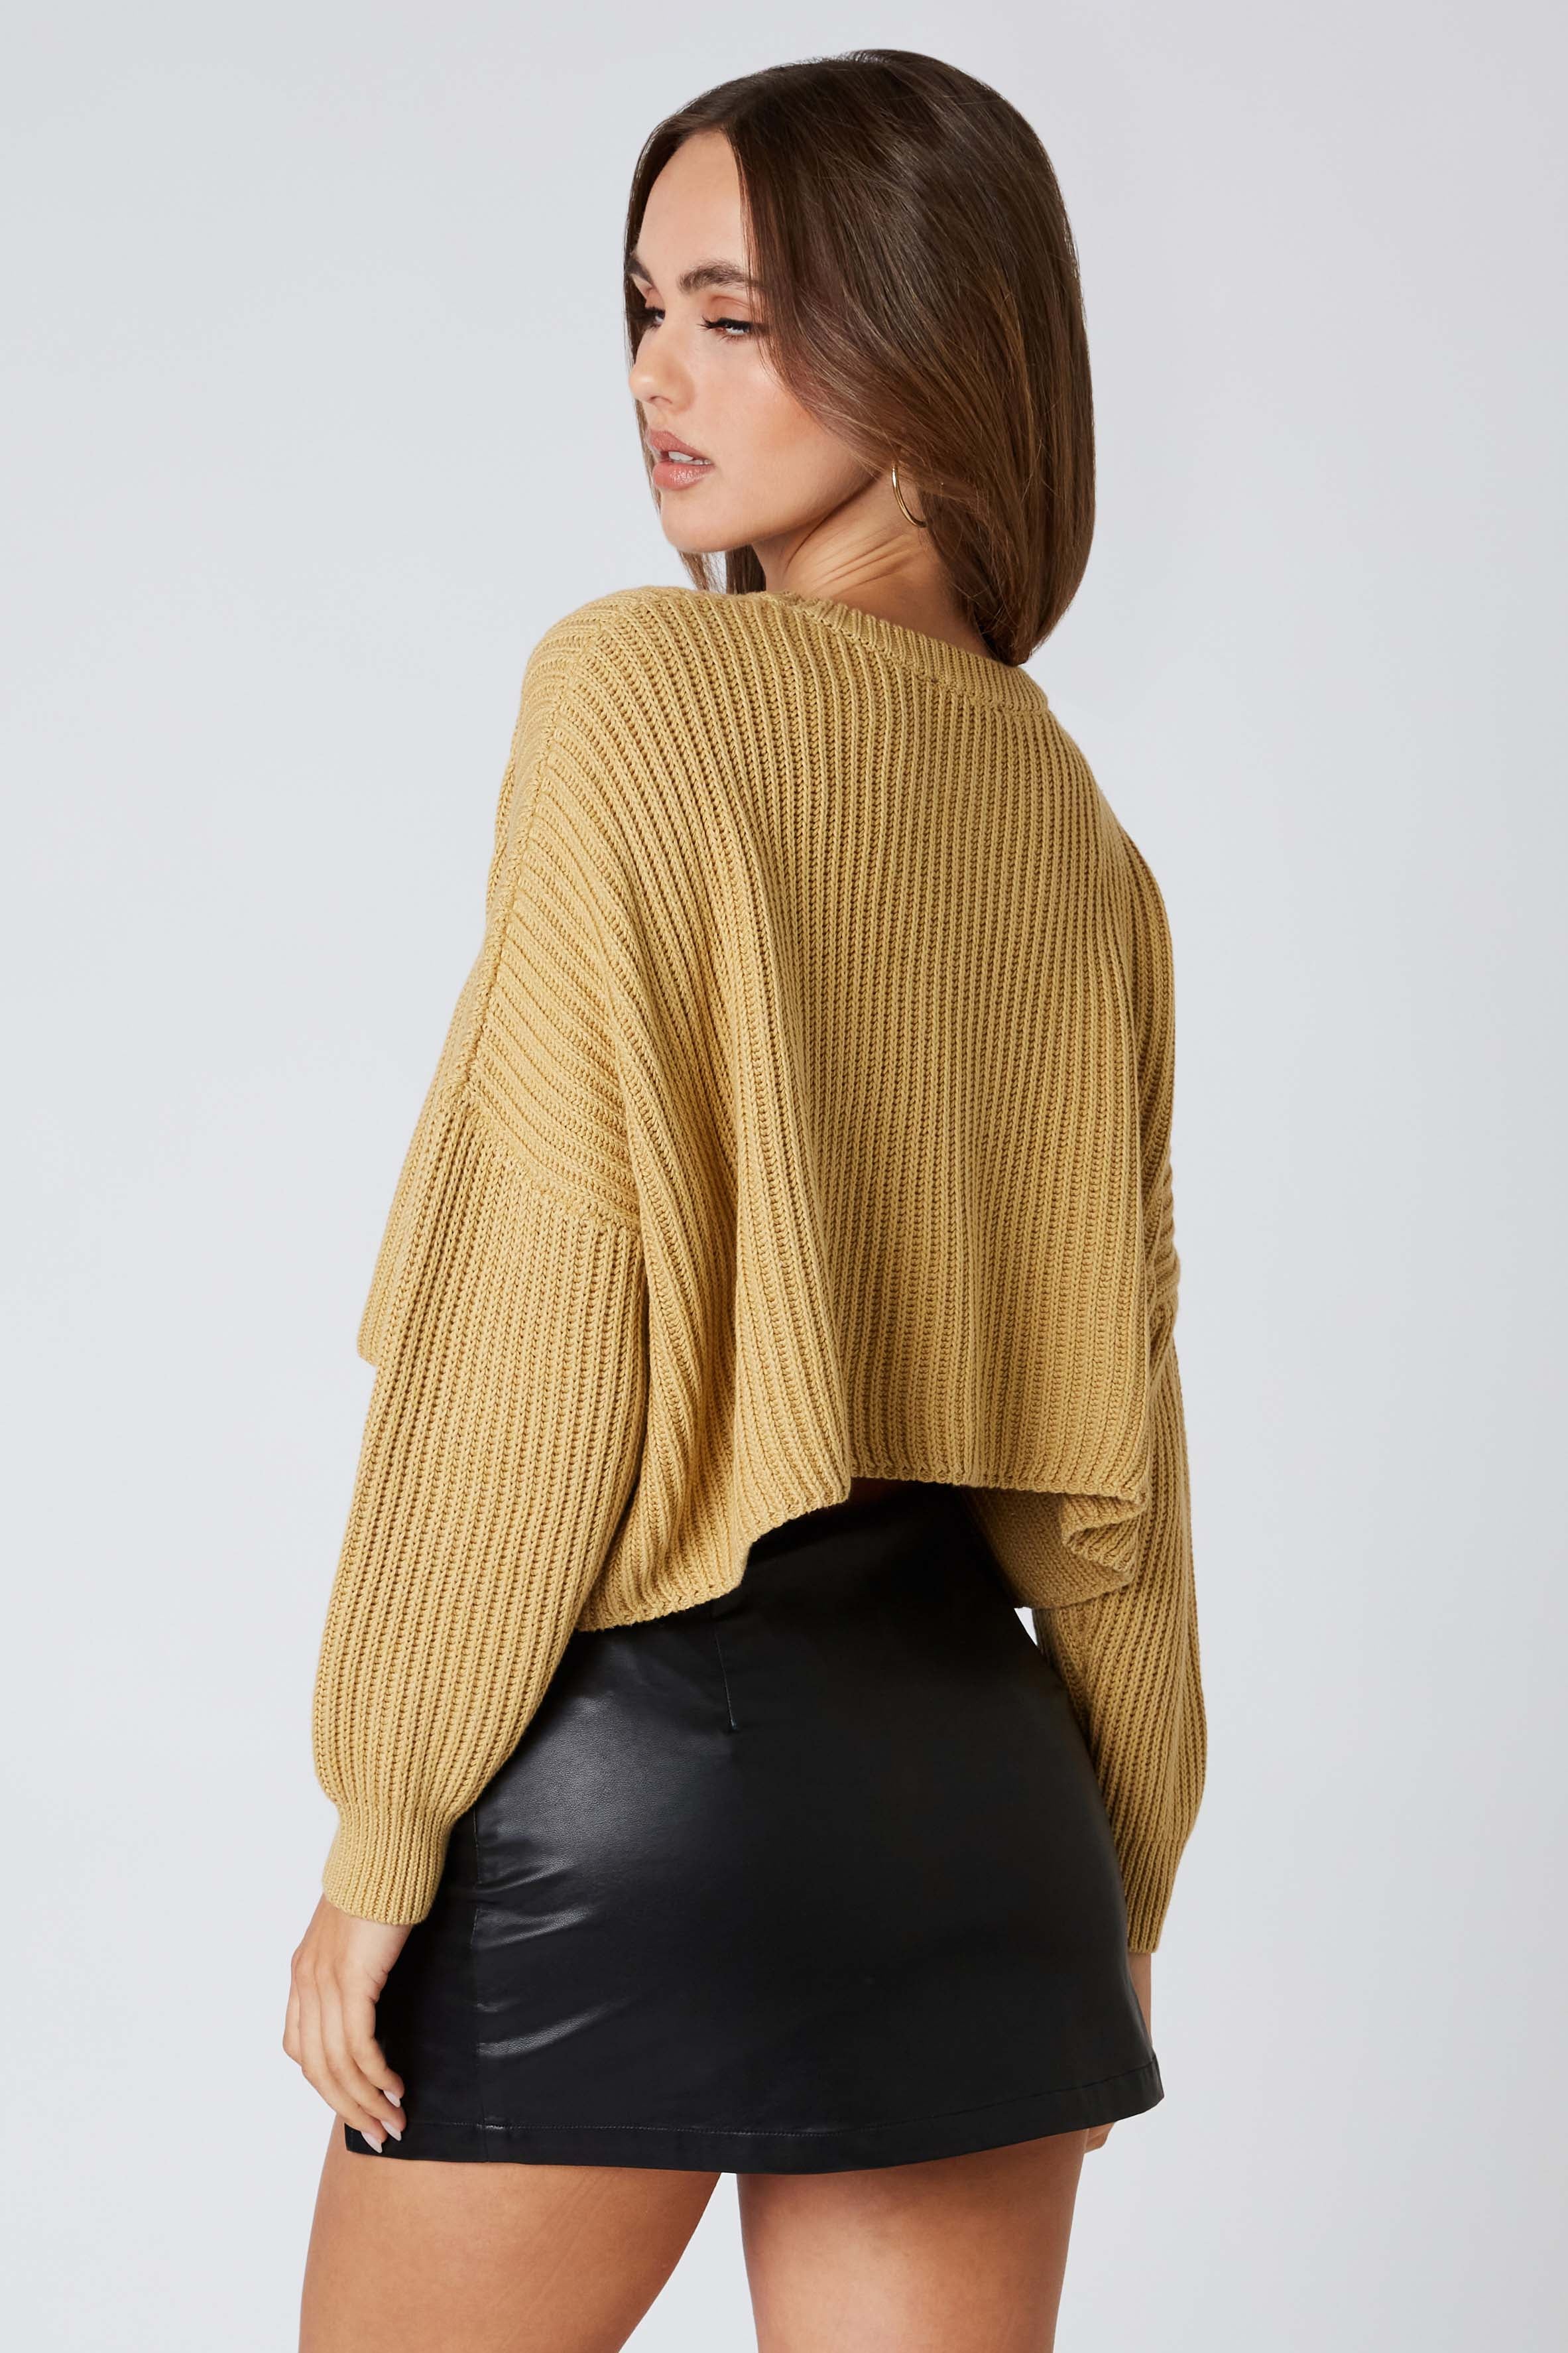 Boxy Cropped Sweater in Wheat Back View